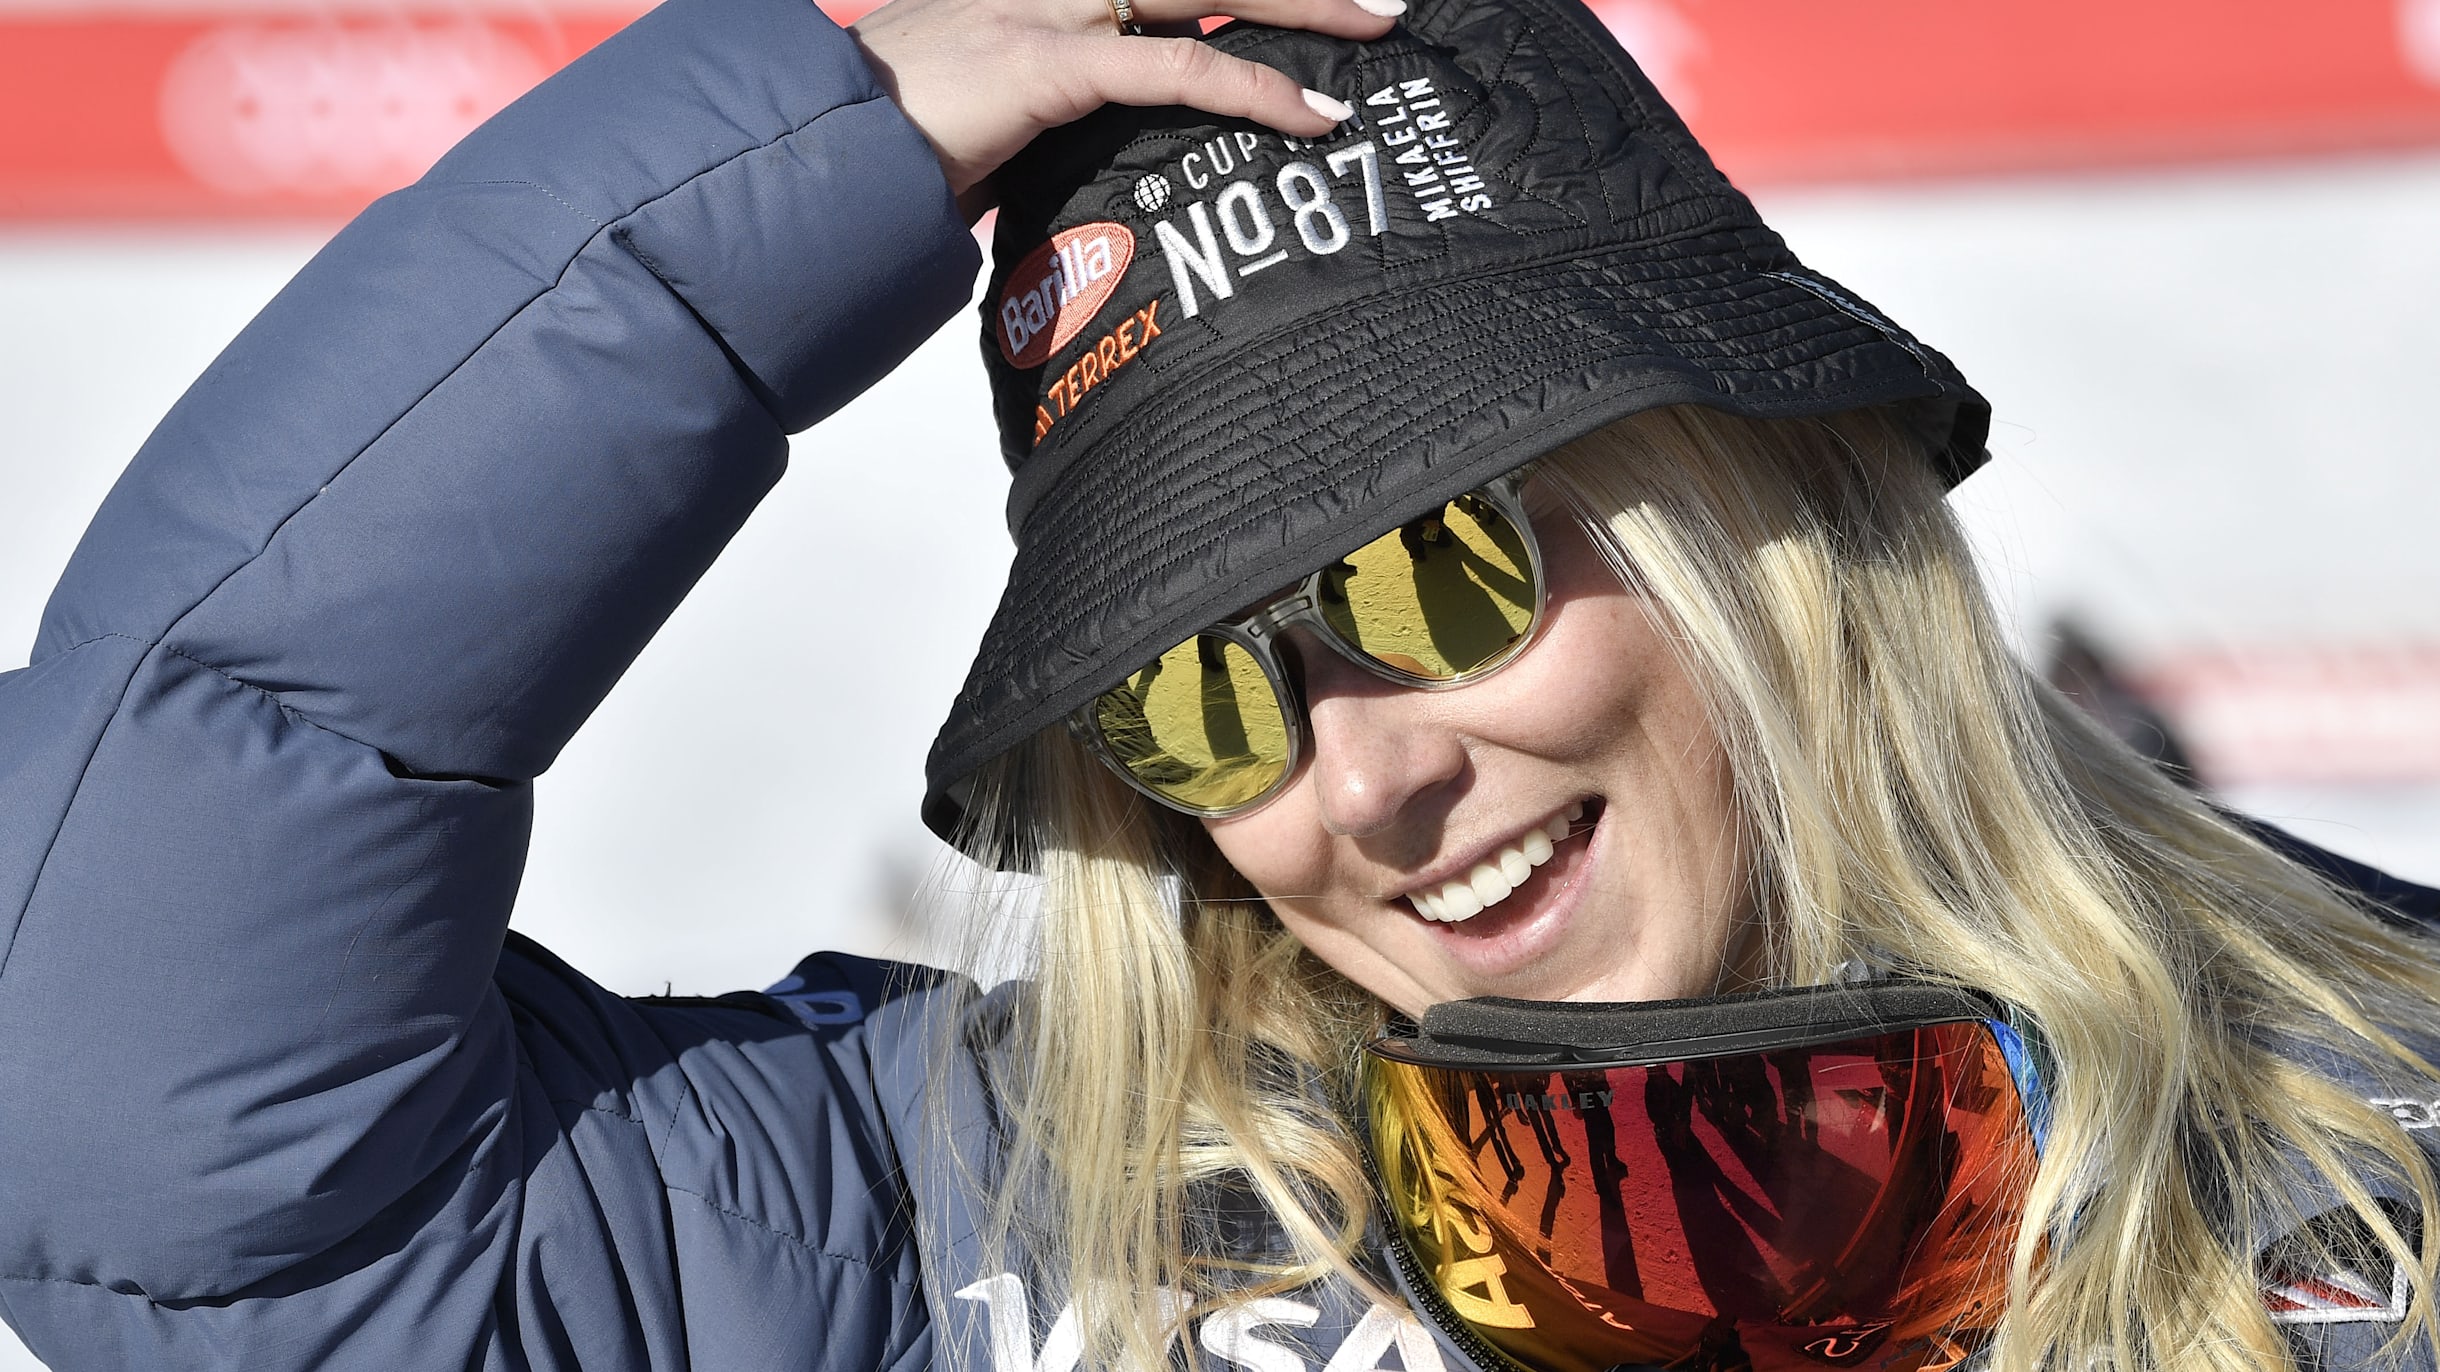 How to watch Mikaela Shiffrin at 2022-23 World Cup Finals in Soldeu, Andorra from 16-19 March